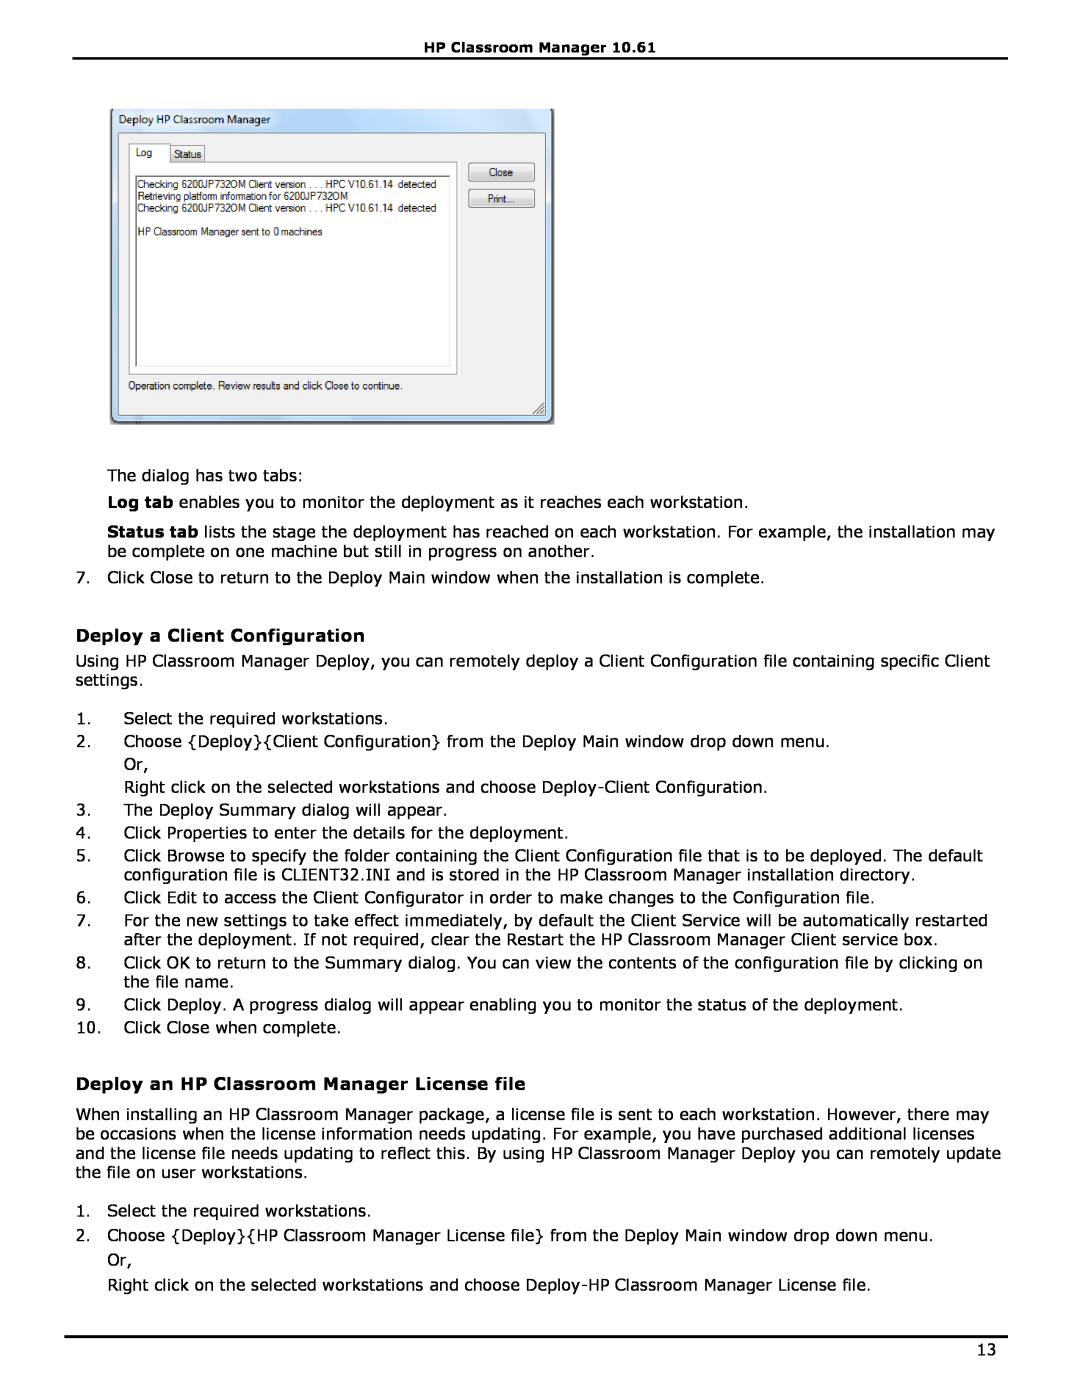 HP manual Deploy a Client Configuration, Deploy an HP Classroom Manager License file 